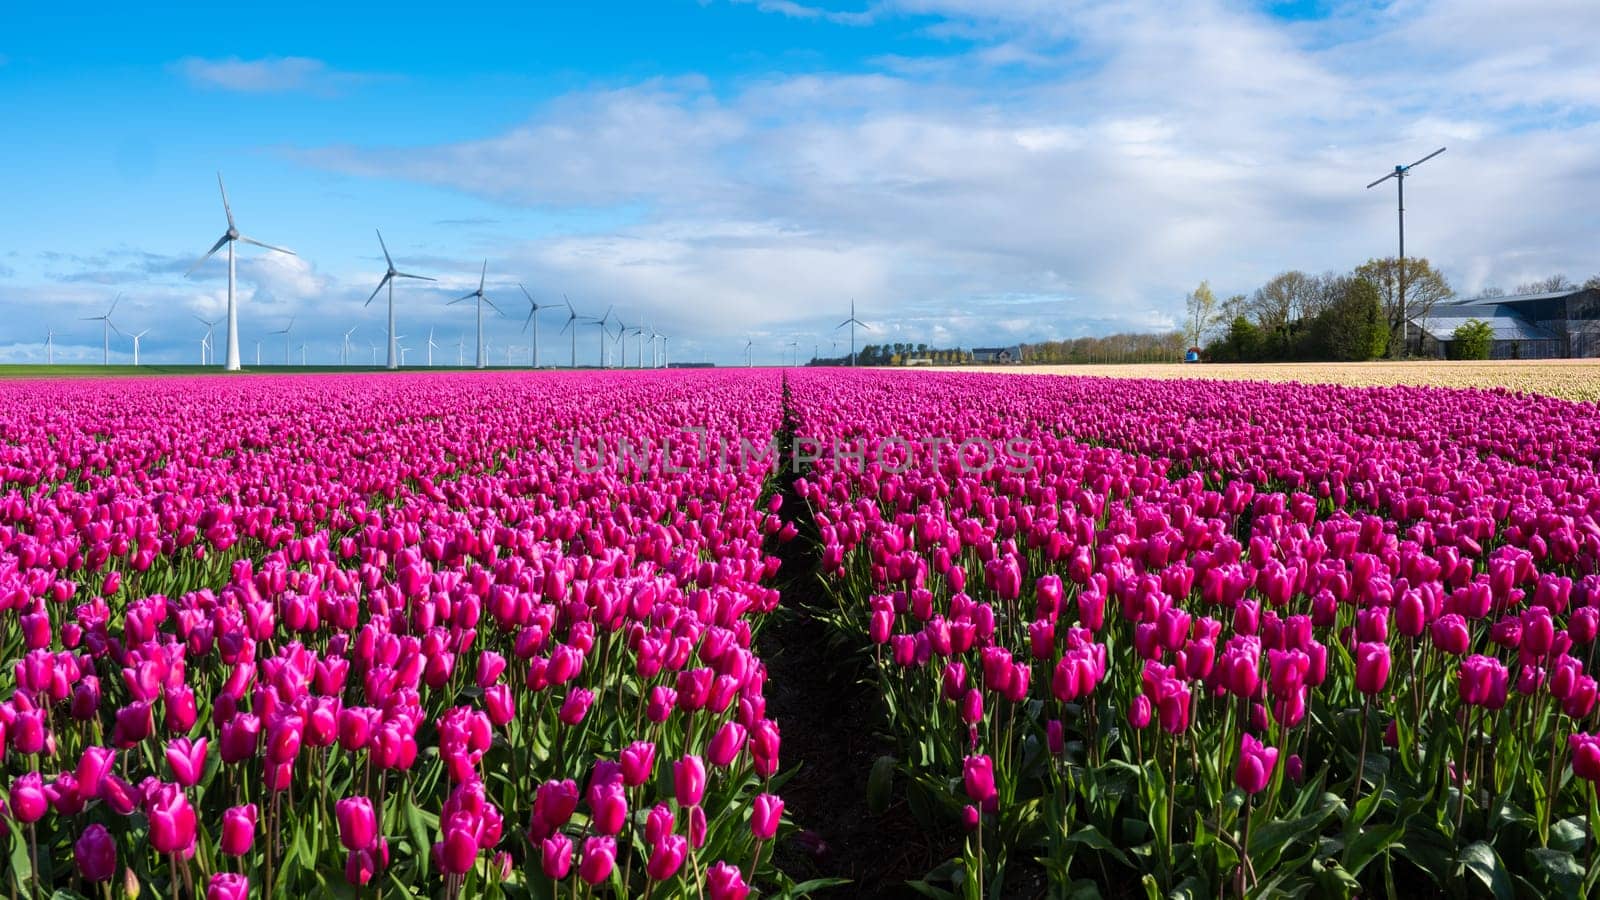 A vibrant field of pink tulips sways gracefully in the wind, framed by majestic windmills scattered across the picturesque Dutch countryside in the Noordoostpolder Netherlands